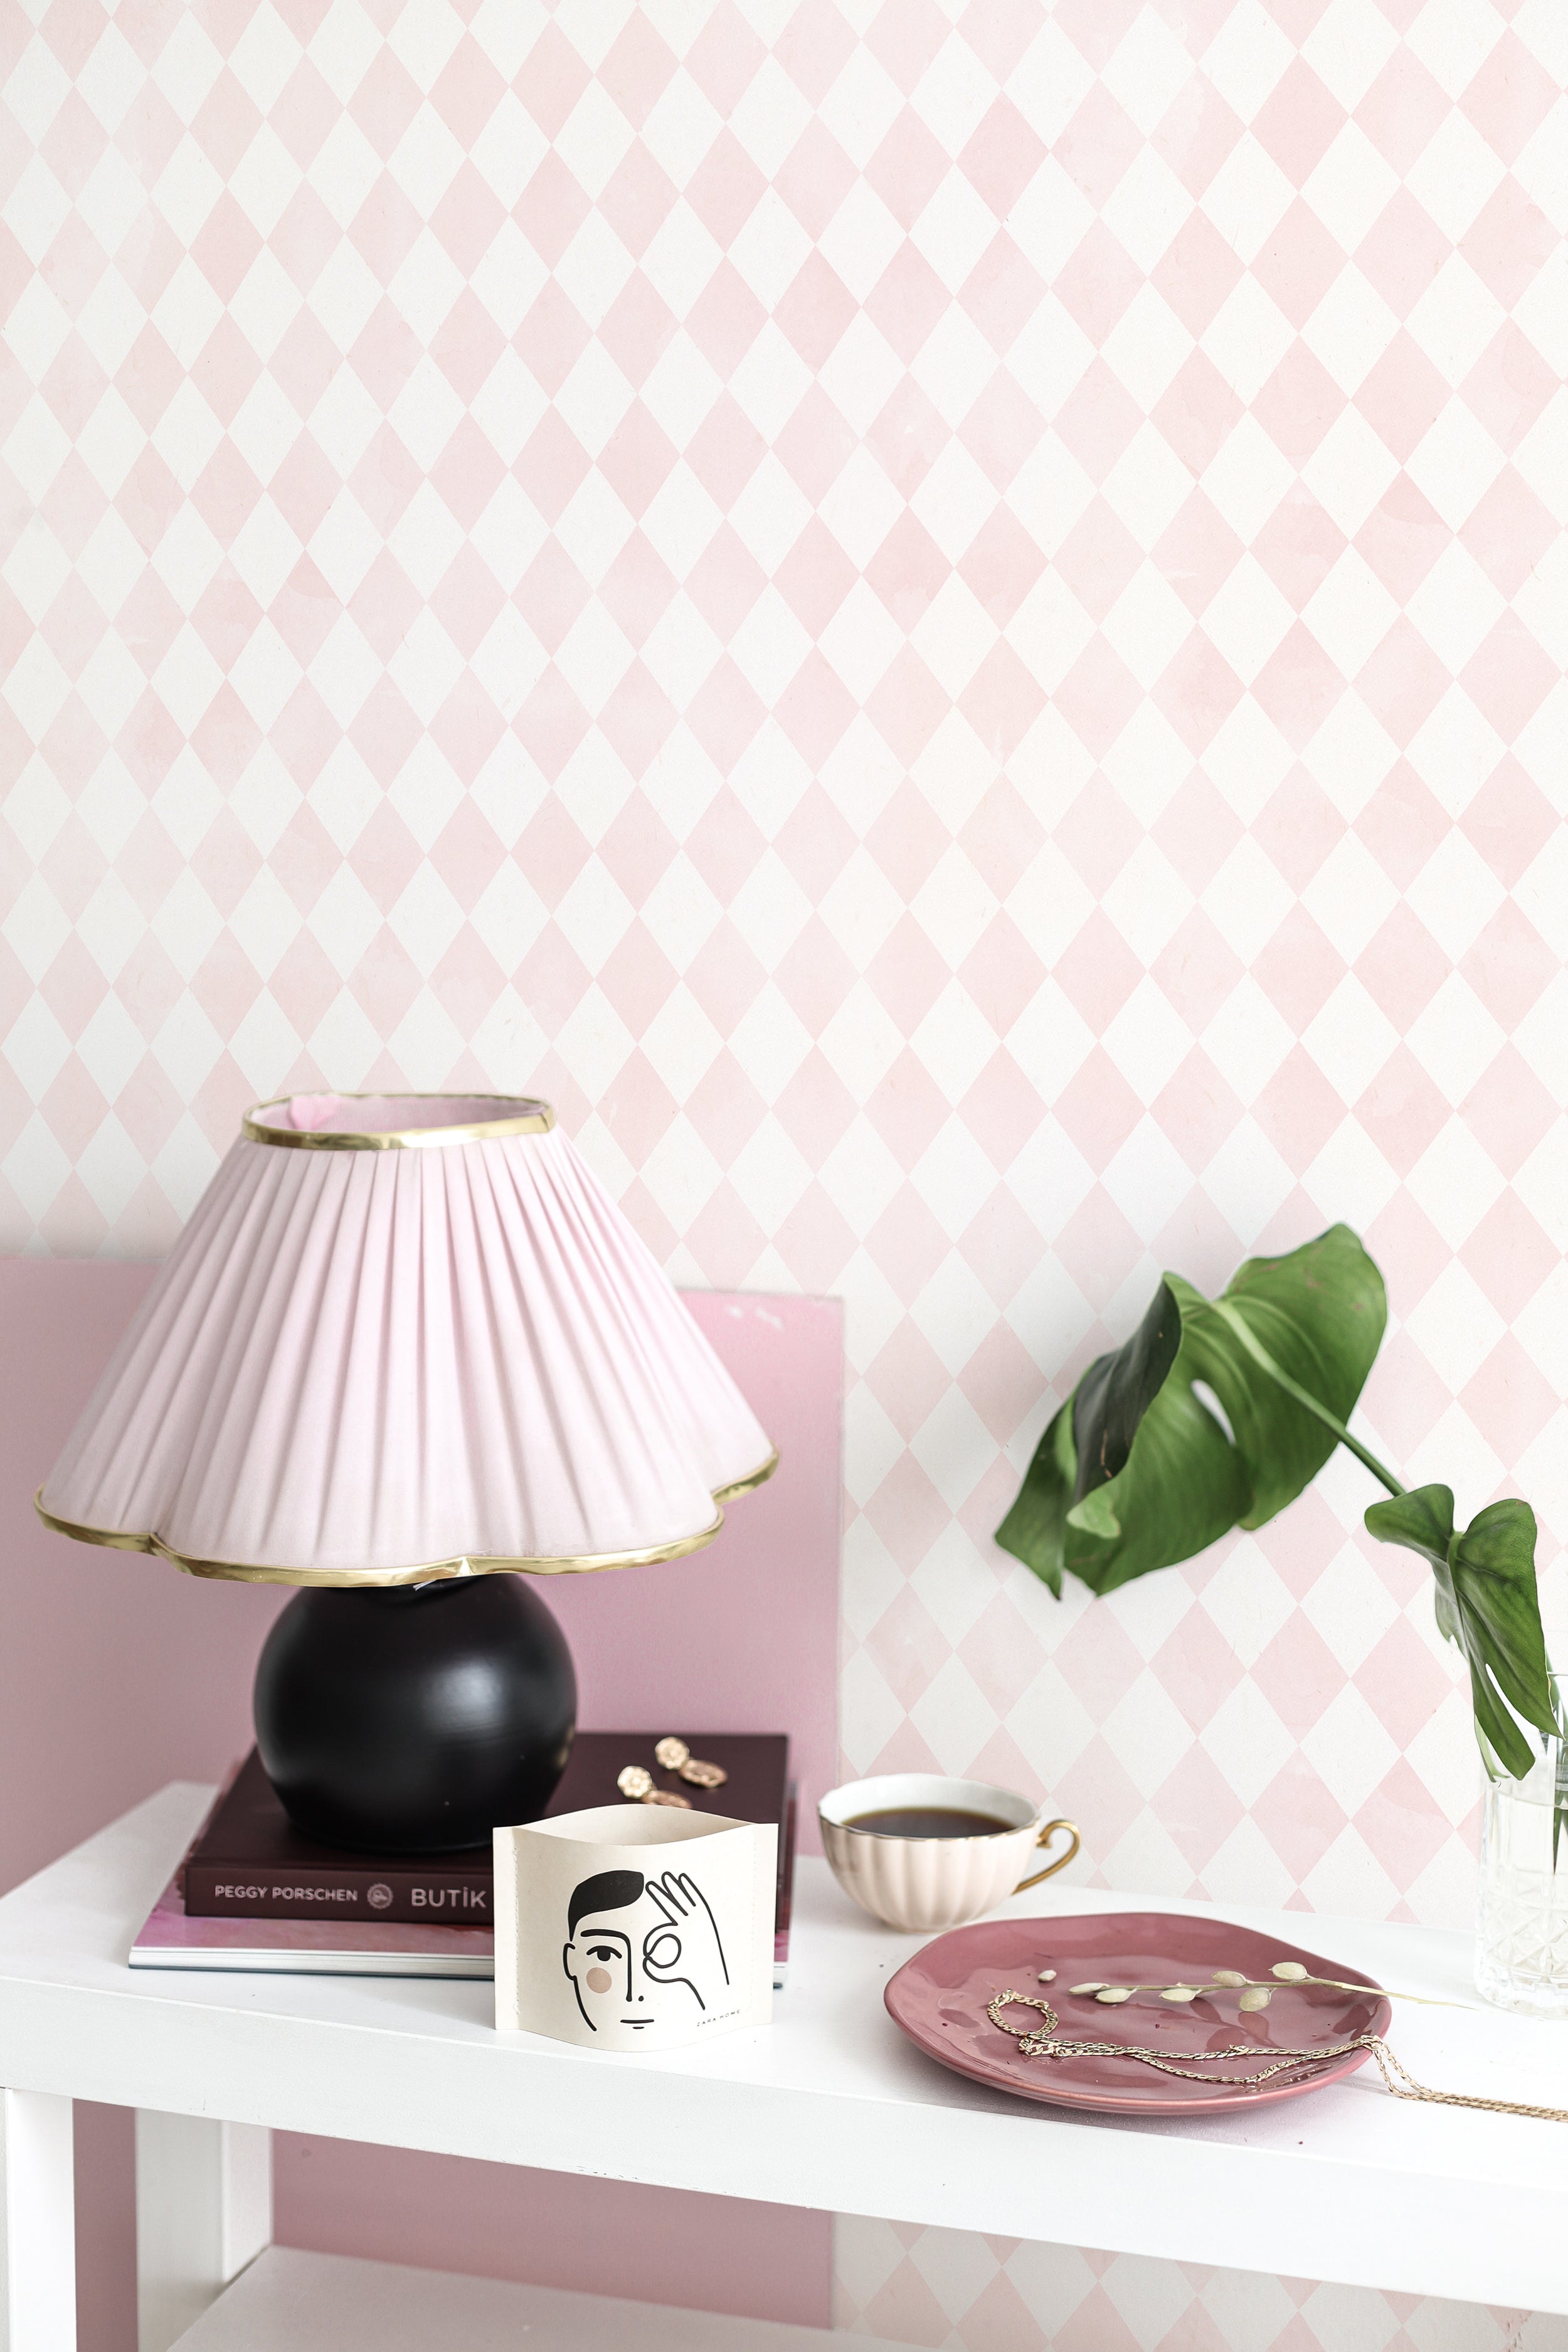 A stylish corner of a room showcasing Rustic Watercolour Geometric Diamonds Wallpaper. The light pink and white diamond pattern provides a soft, watercolor-like background for a black table lamp, books, and decorative items, enhancing the chic, feminine decor.